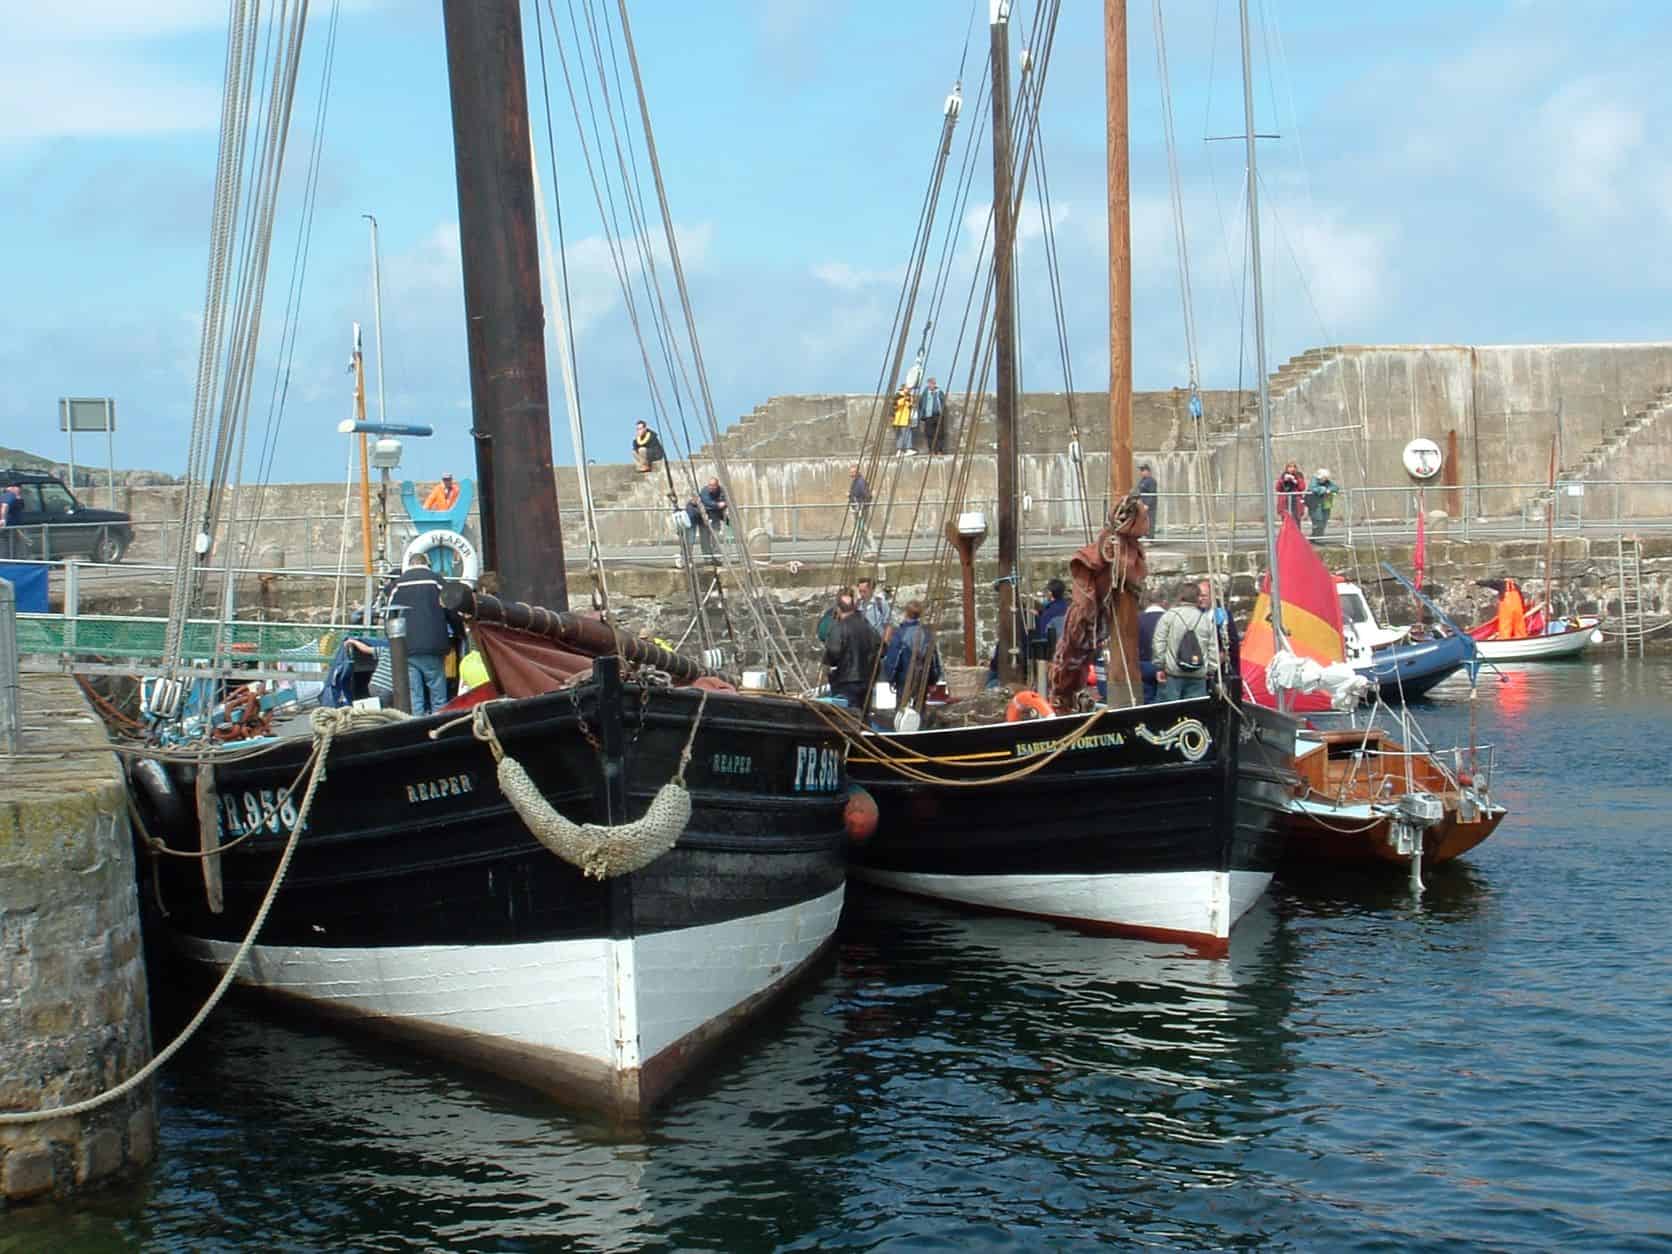 Portsoy New Harbour